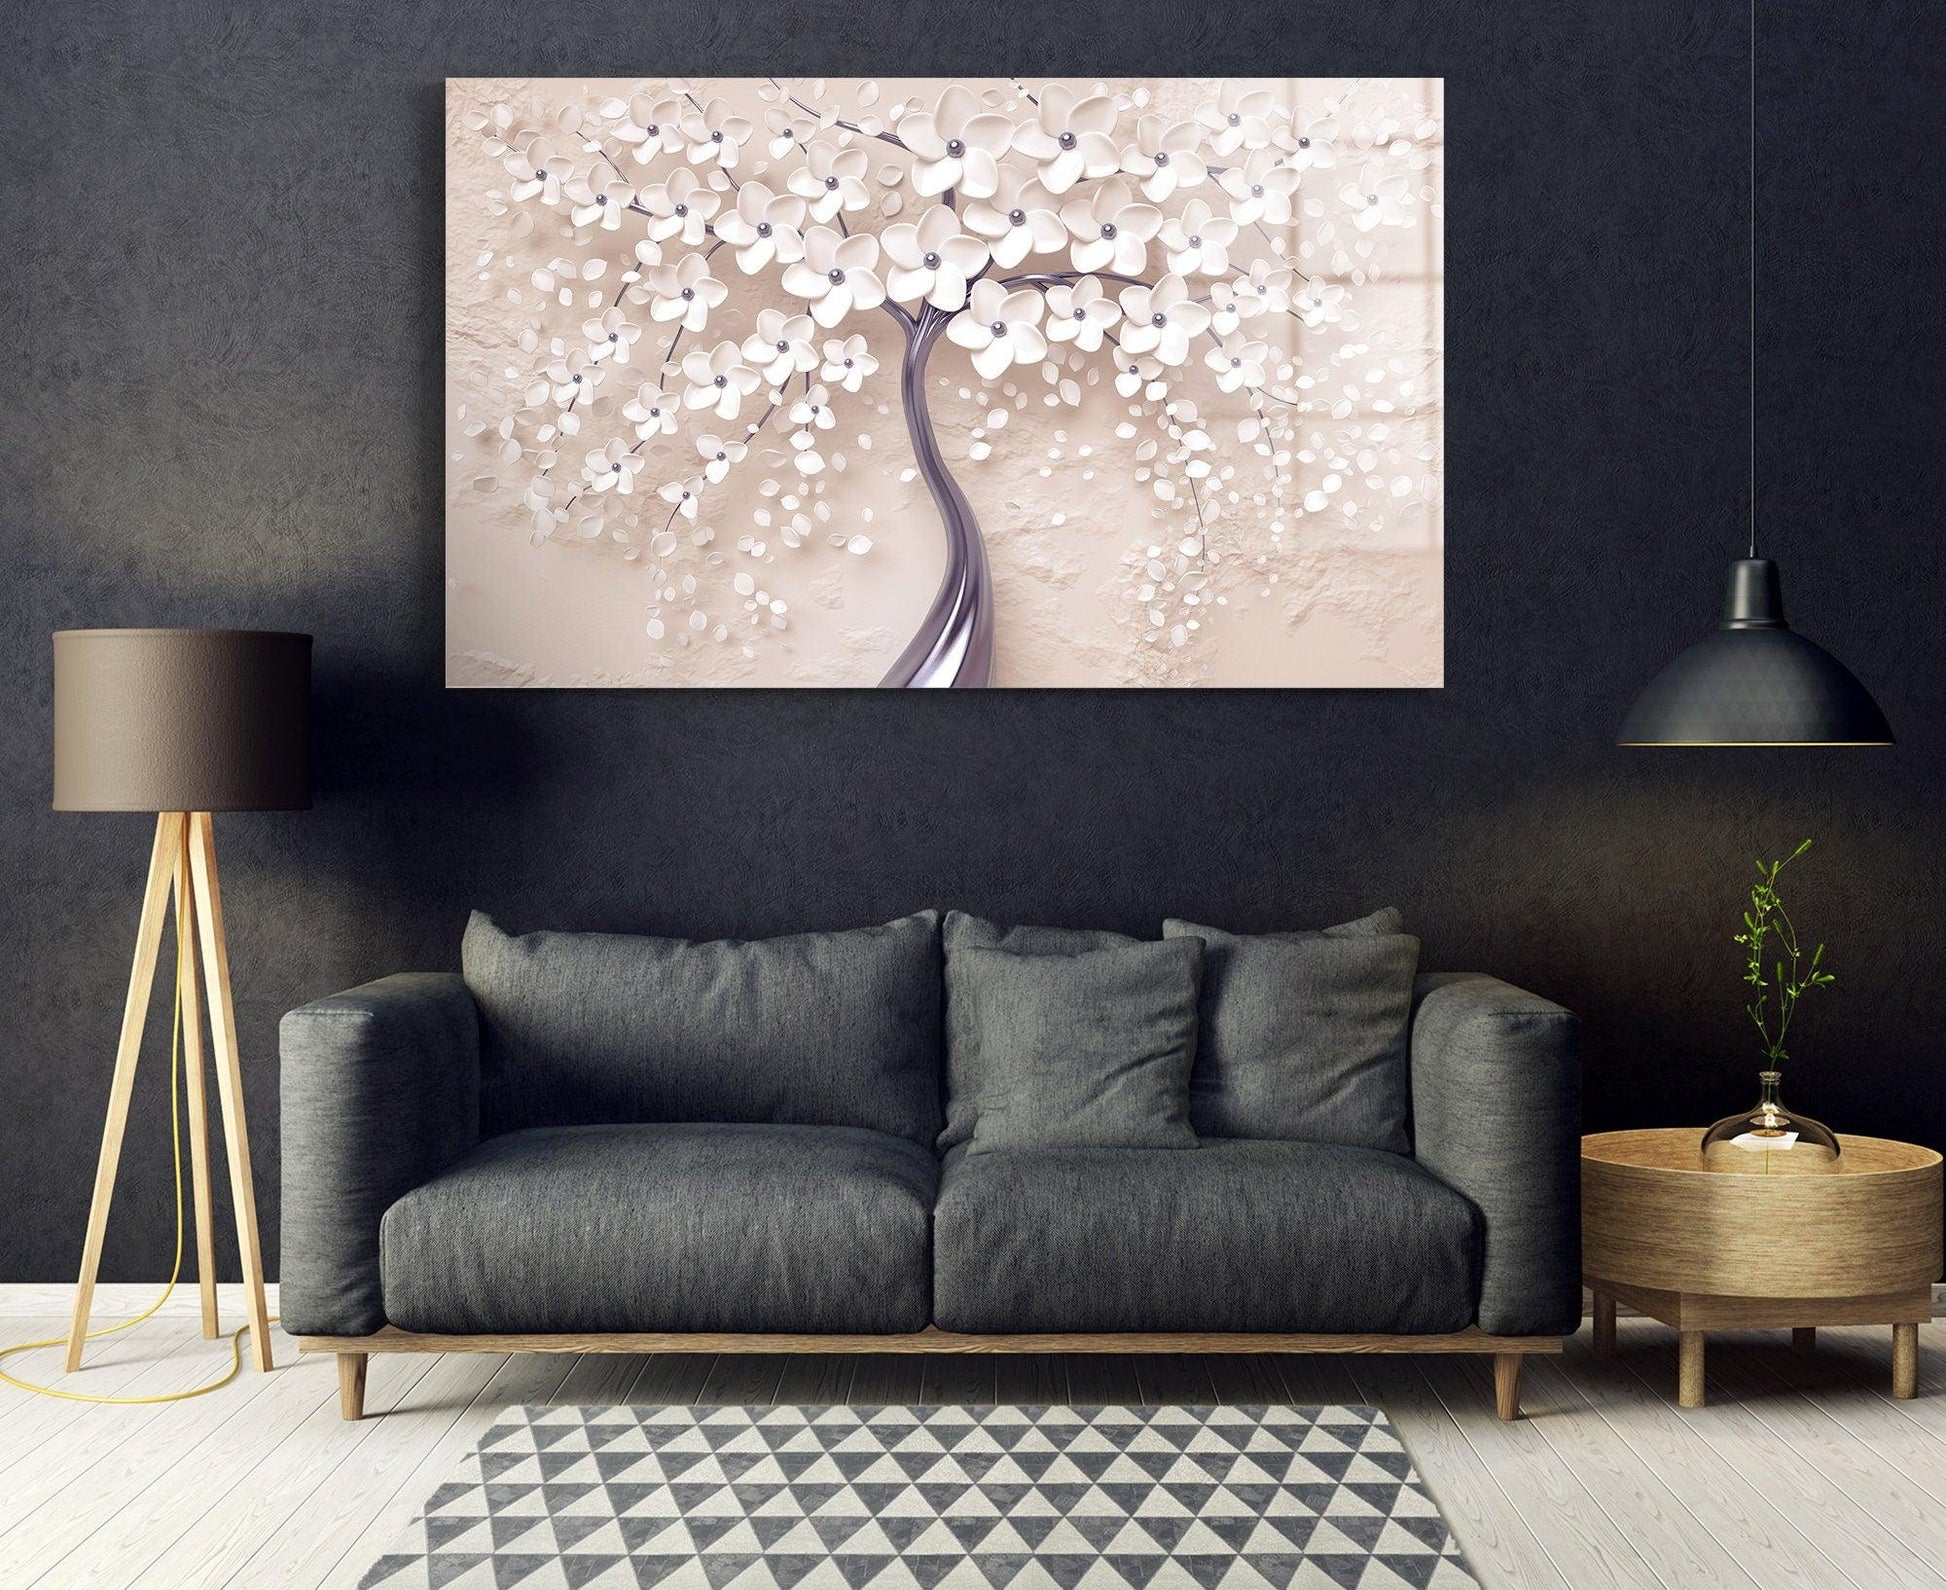 Abstract Flowers Tempered Glass Printing Wall Art| light pink Wall Decor, White Flowers Landscape, Flower glass wall decor, Housewarming - TrendiArt